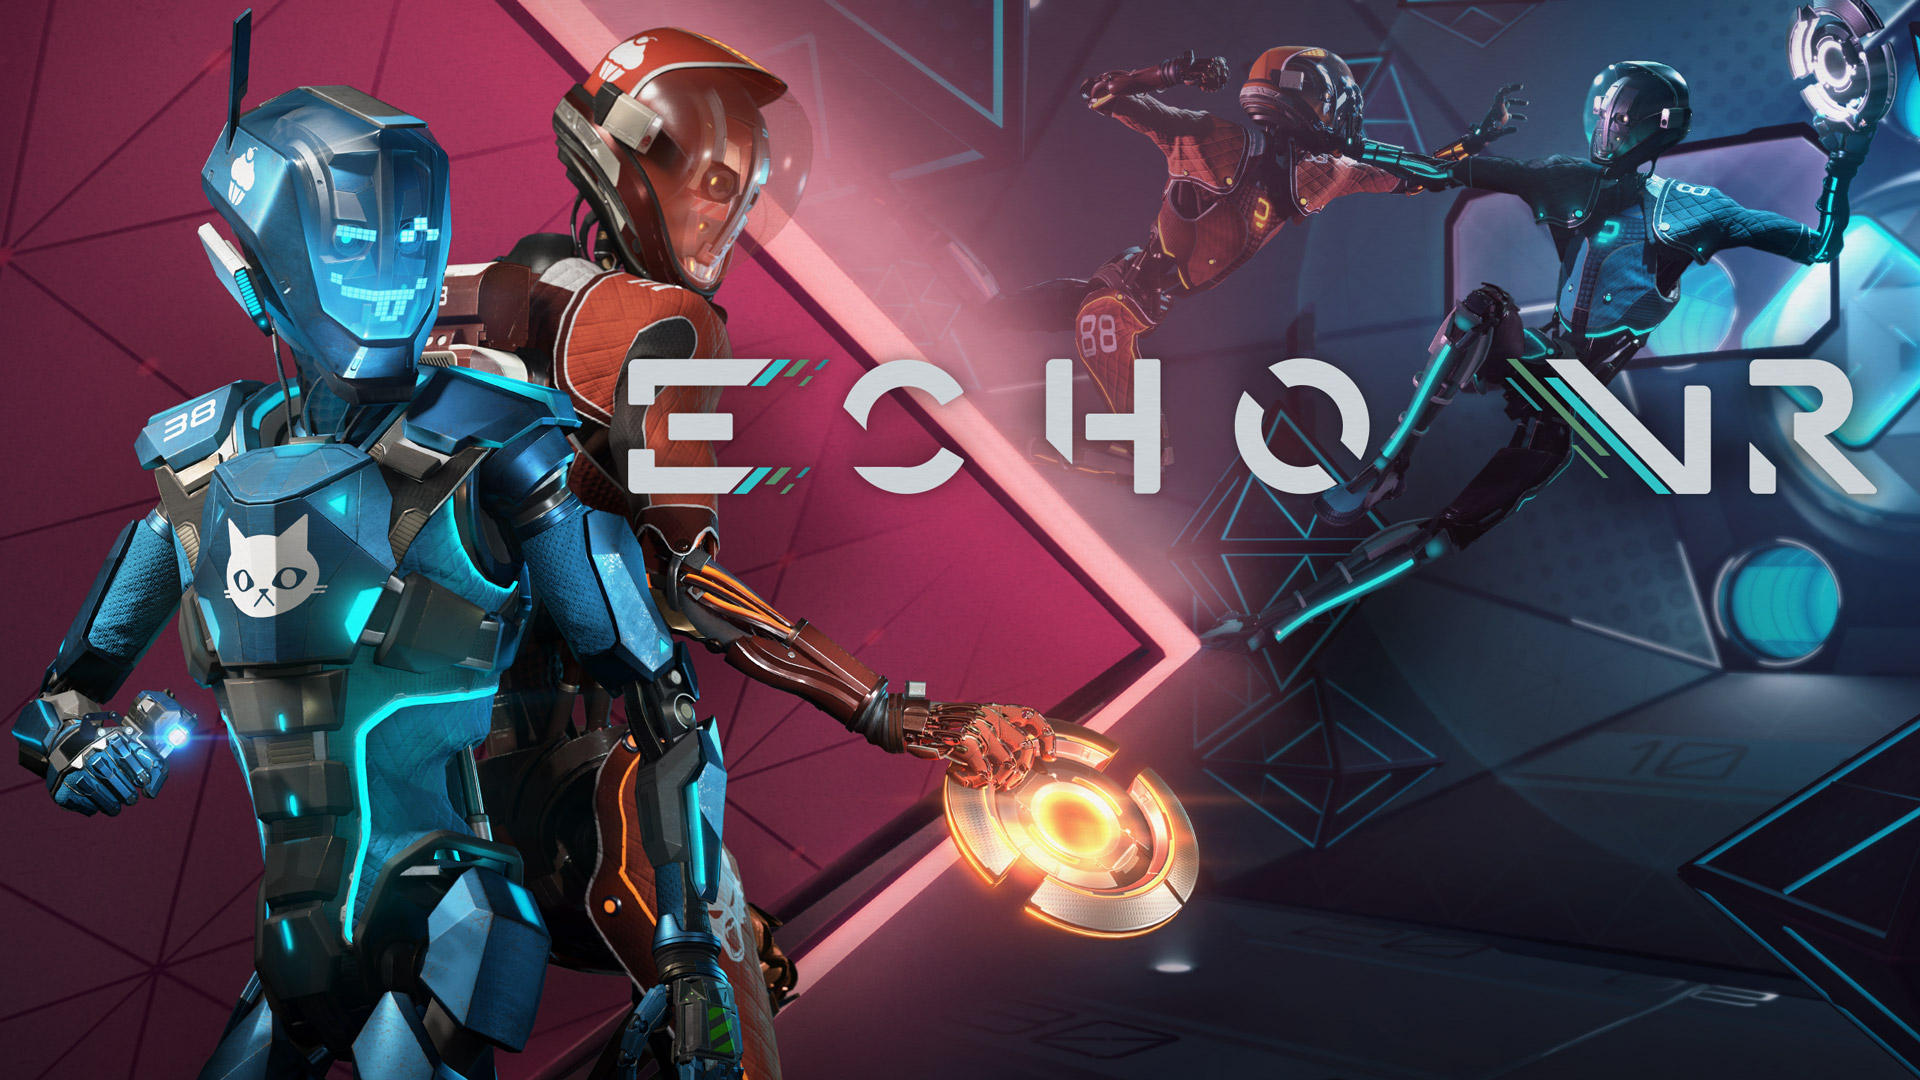 Echo Arena' Becomes 'Echo VR' to Make Way for 'Echo Combat', and Maybe More One Day